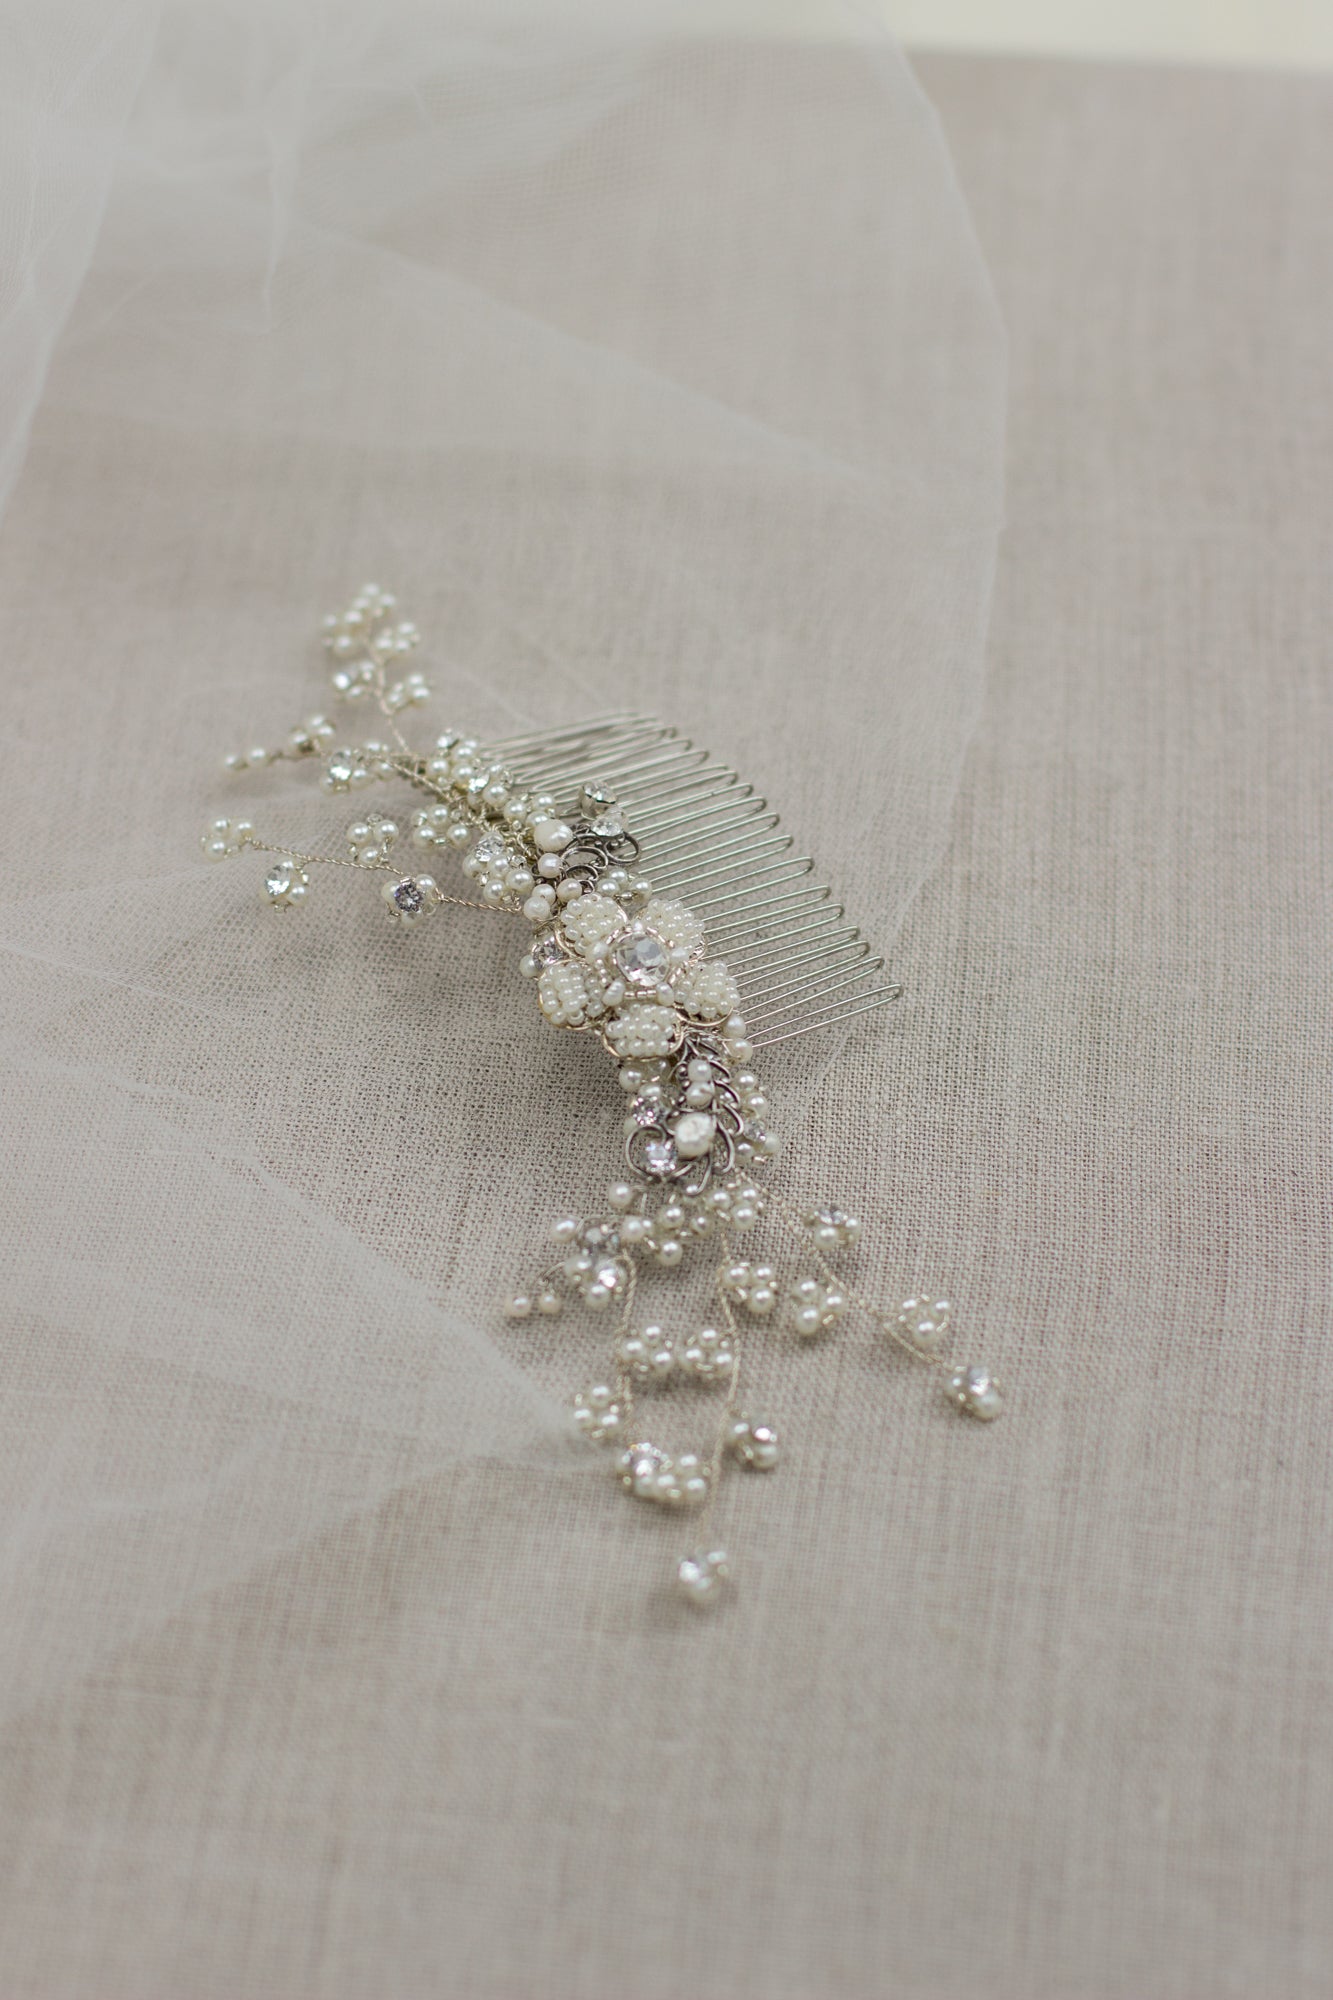 Explore unique handmade bridal hair accessories at our online boutique in Europe. This beautiful one of a kind pearl hair comb, bridal hair adornment, crystal wedding headpiece features floral motifs, pearl twigs decorated with crystals. Perfect for your special day.